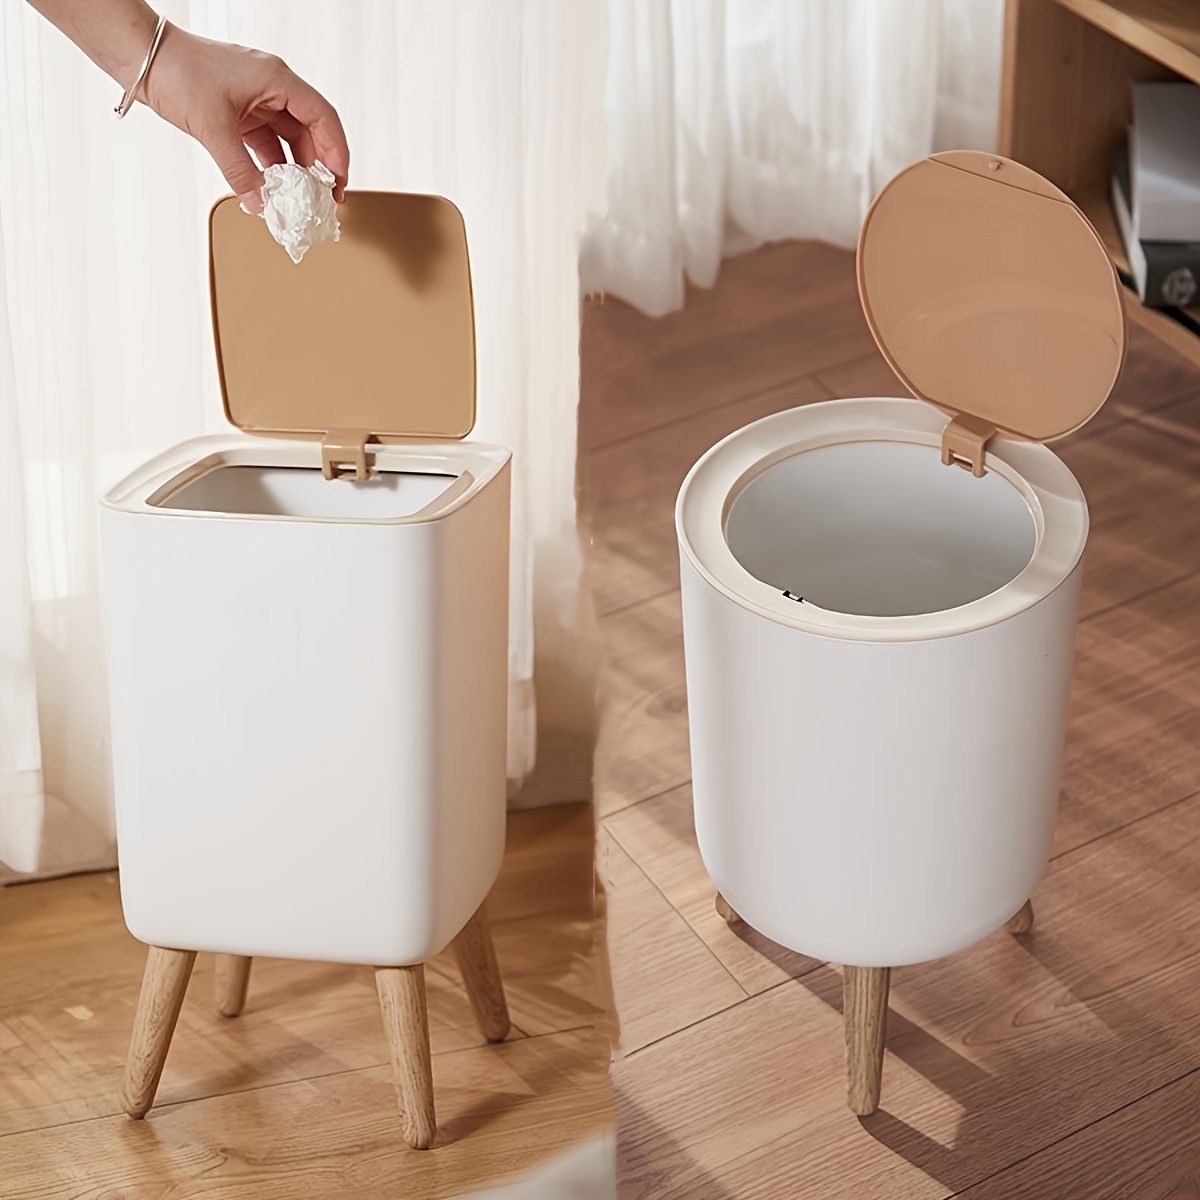 

1pc 2l/7l/10l Simple Trash Can, Fashion With Foot White Garbage Can, Paper Basket, Tabletop Garbage Bin With Lid For Living Room Bedroom Kitchen Bathroom Office,